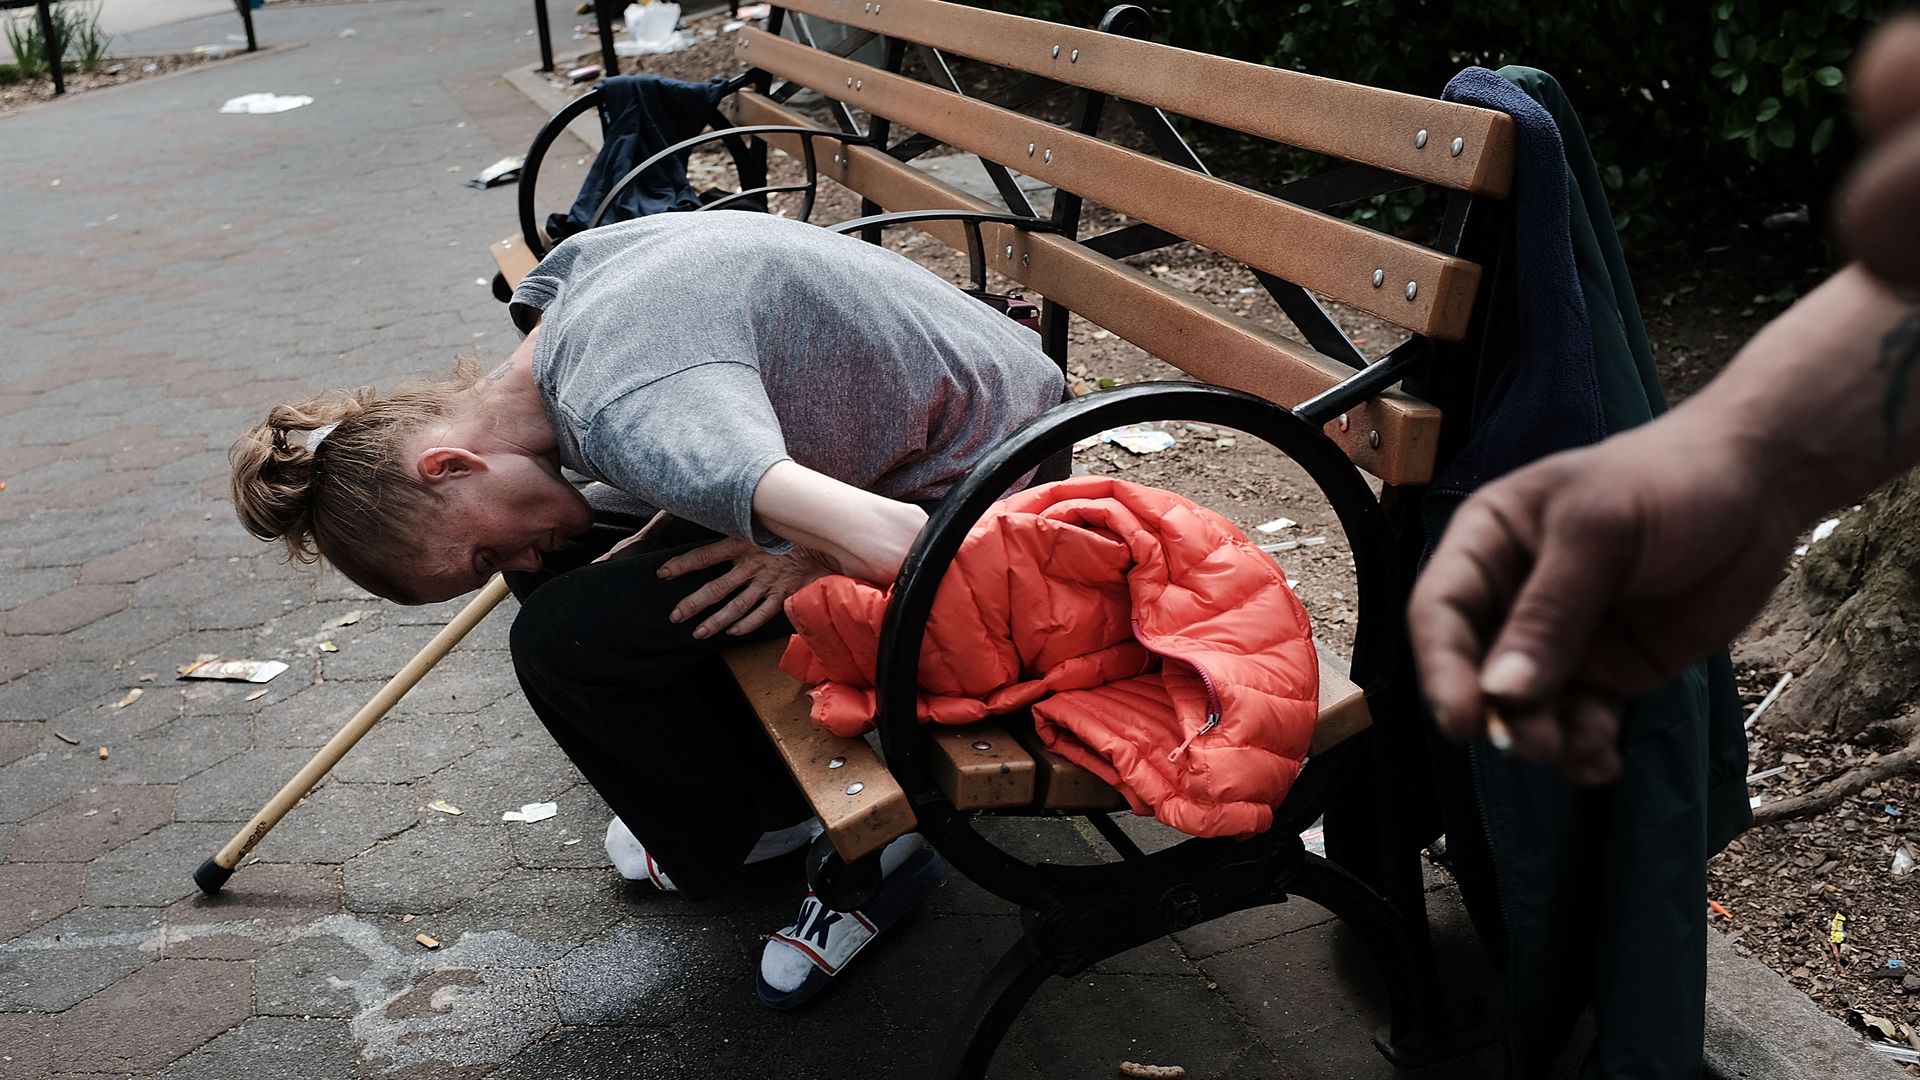 A heroin addict passed out in a park in New York City.